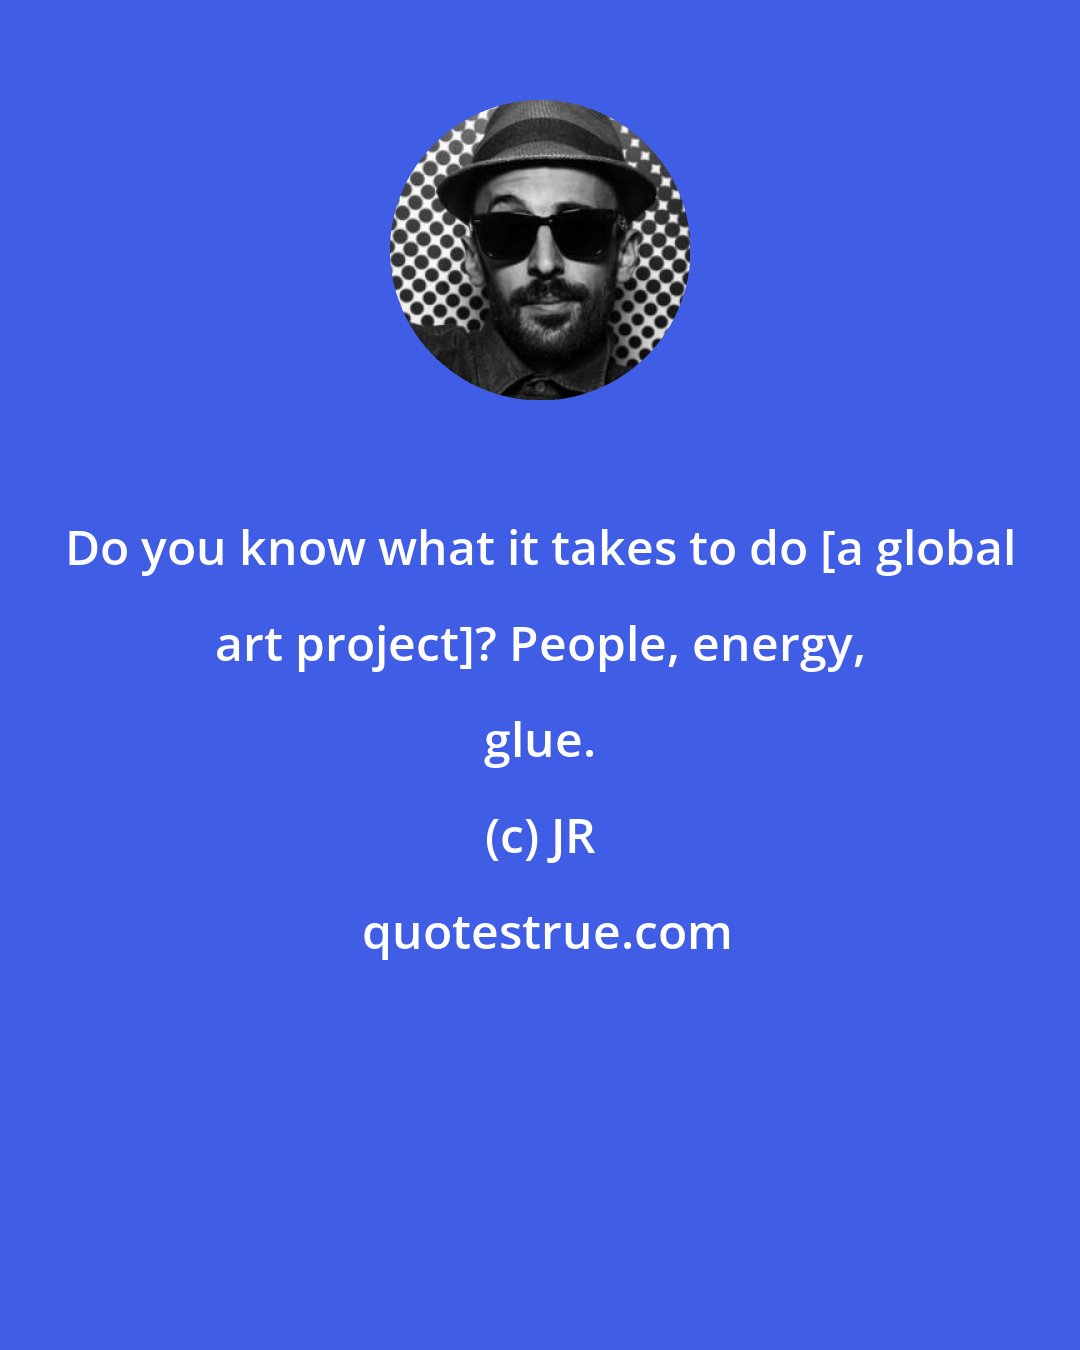 JR: Do you know what it takes to do [a global art project]? People, energy, glue.